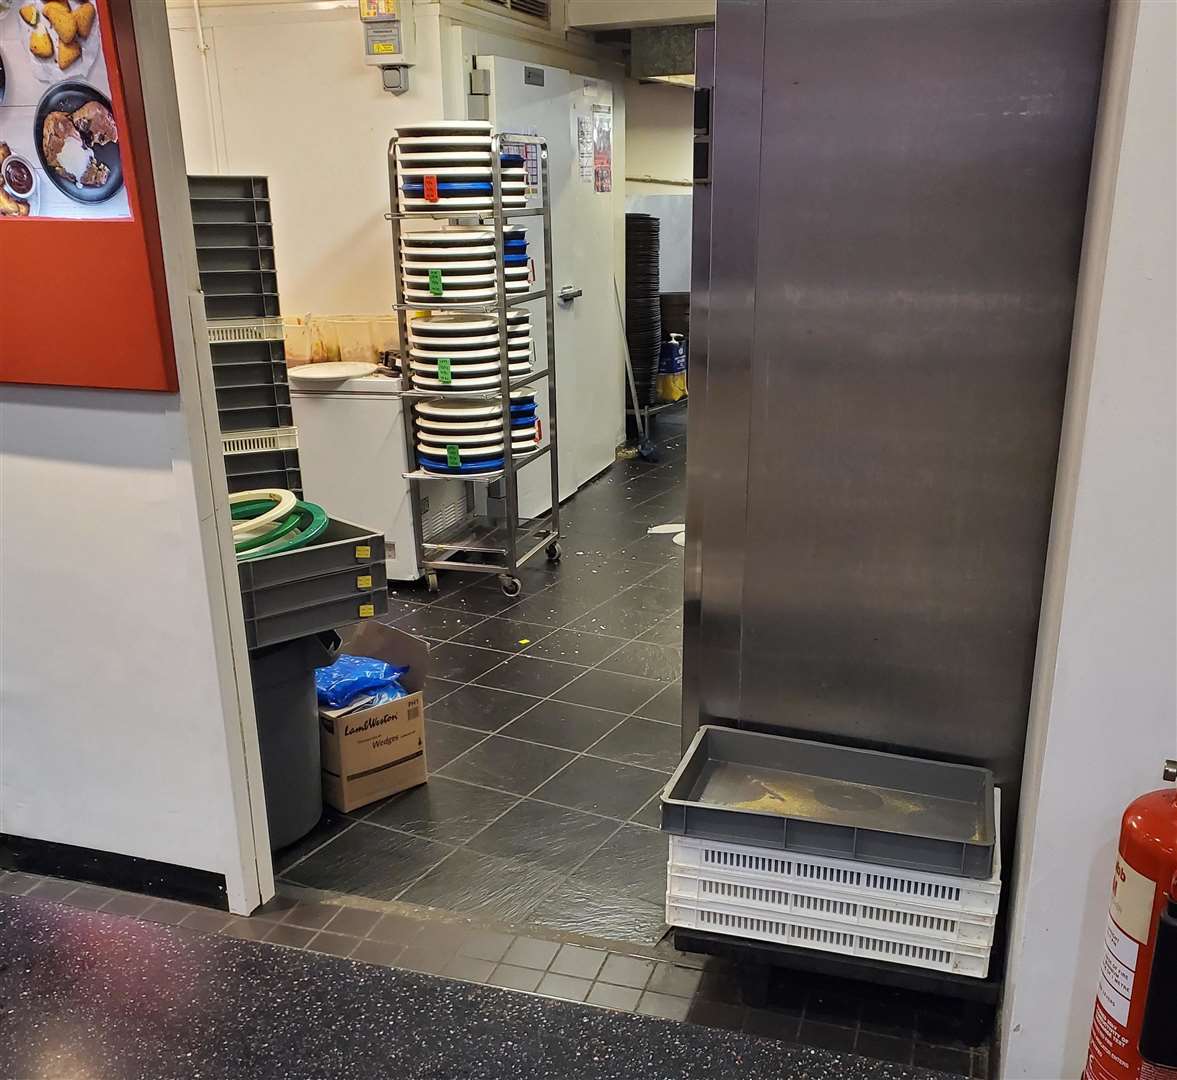 It was previously reported how staff at Pizza Hut in Perry Street prepared a pizza on top of a fridge